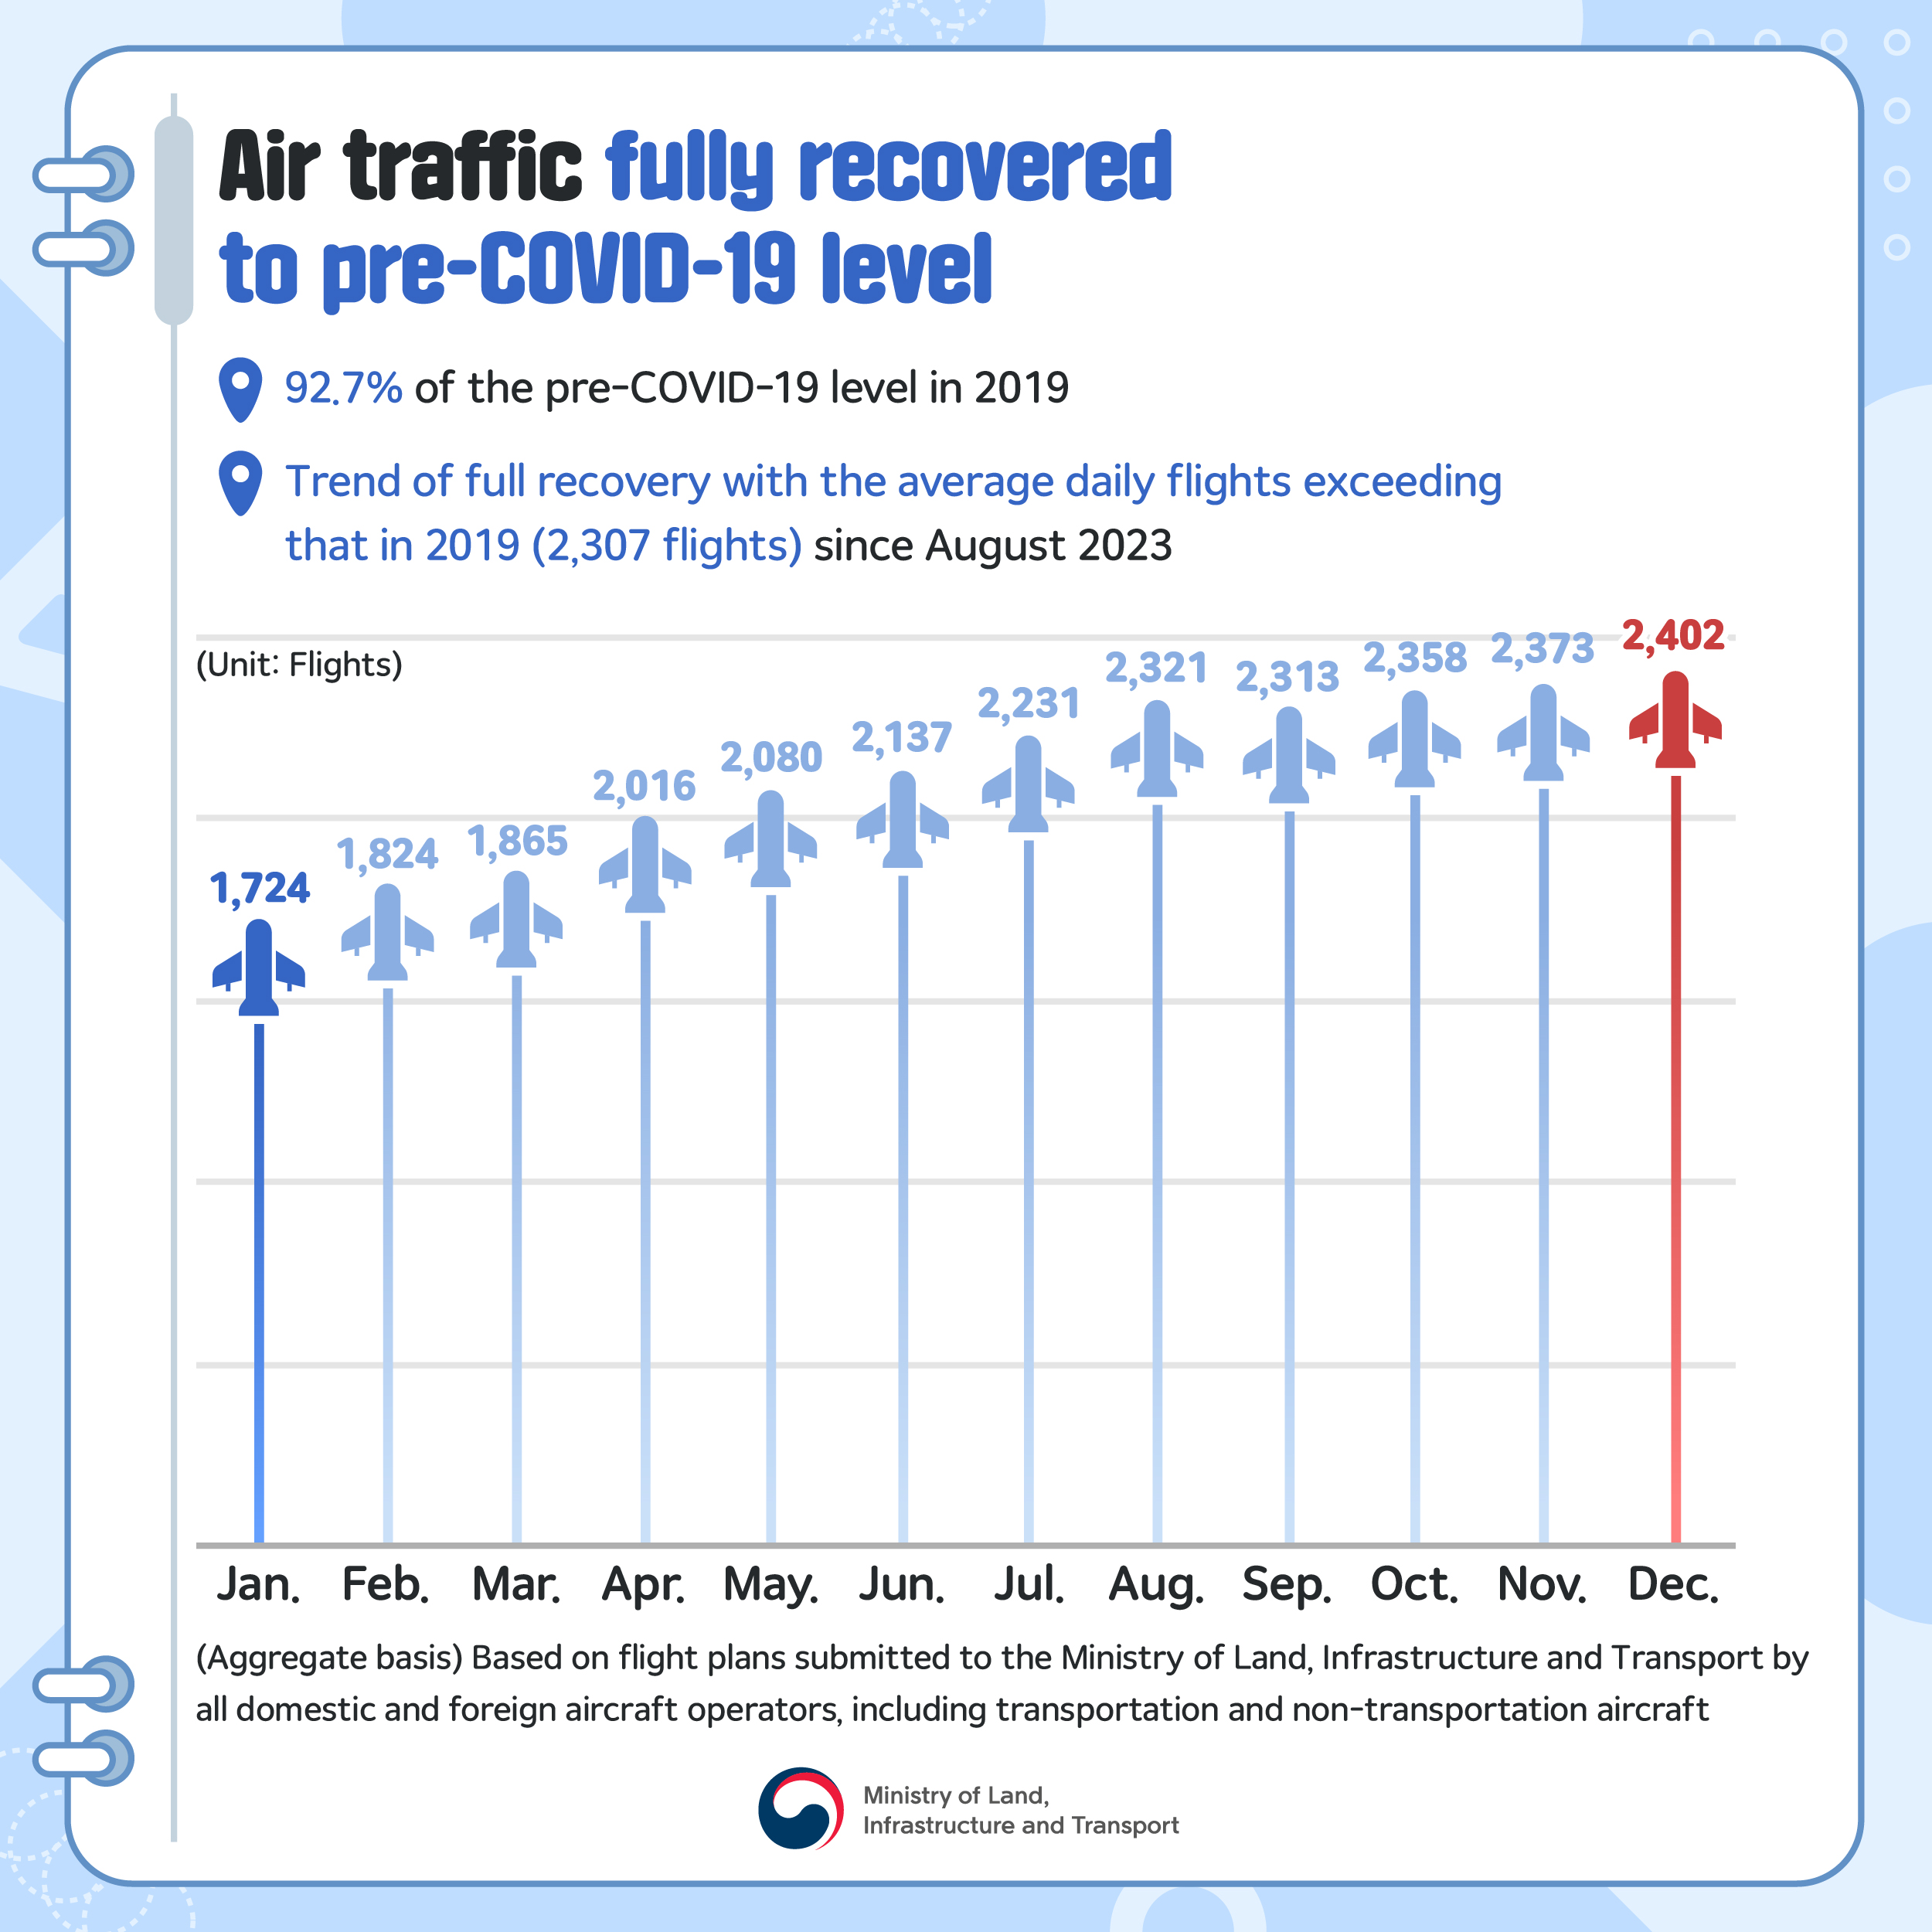 pic 3. Air traffic fully recoverd to pre-COVID-19 level - 92,7% of the pre-COVID-19 level in 2019, Trend of full recovery with the average daily flight exceeding that in 2019 (2,307 flights) since August 2023